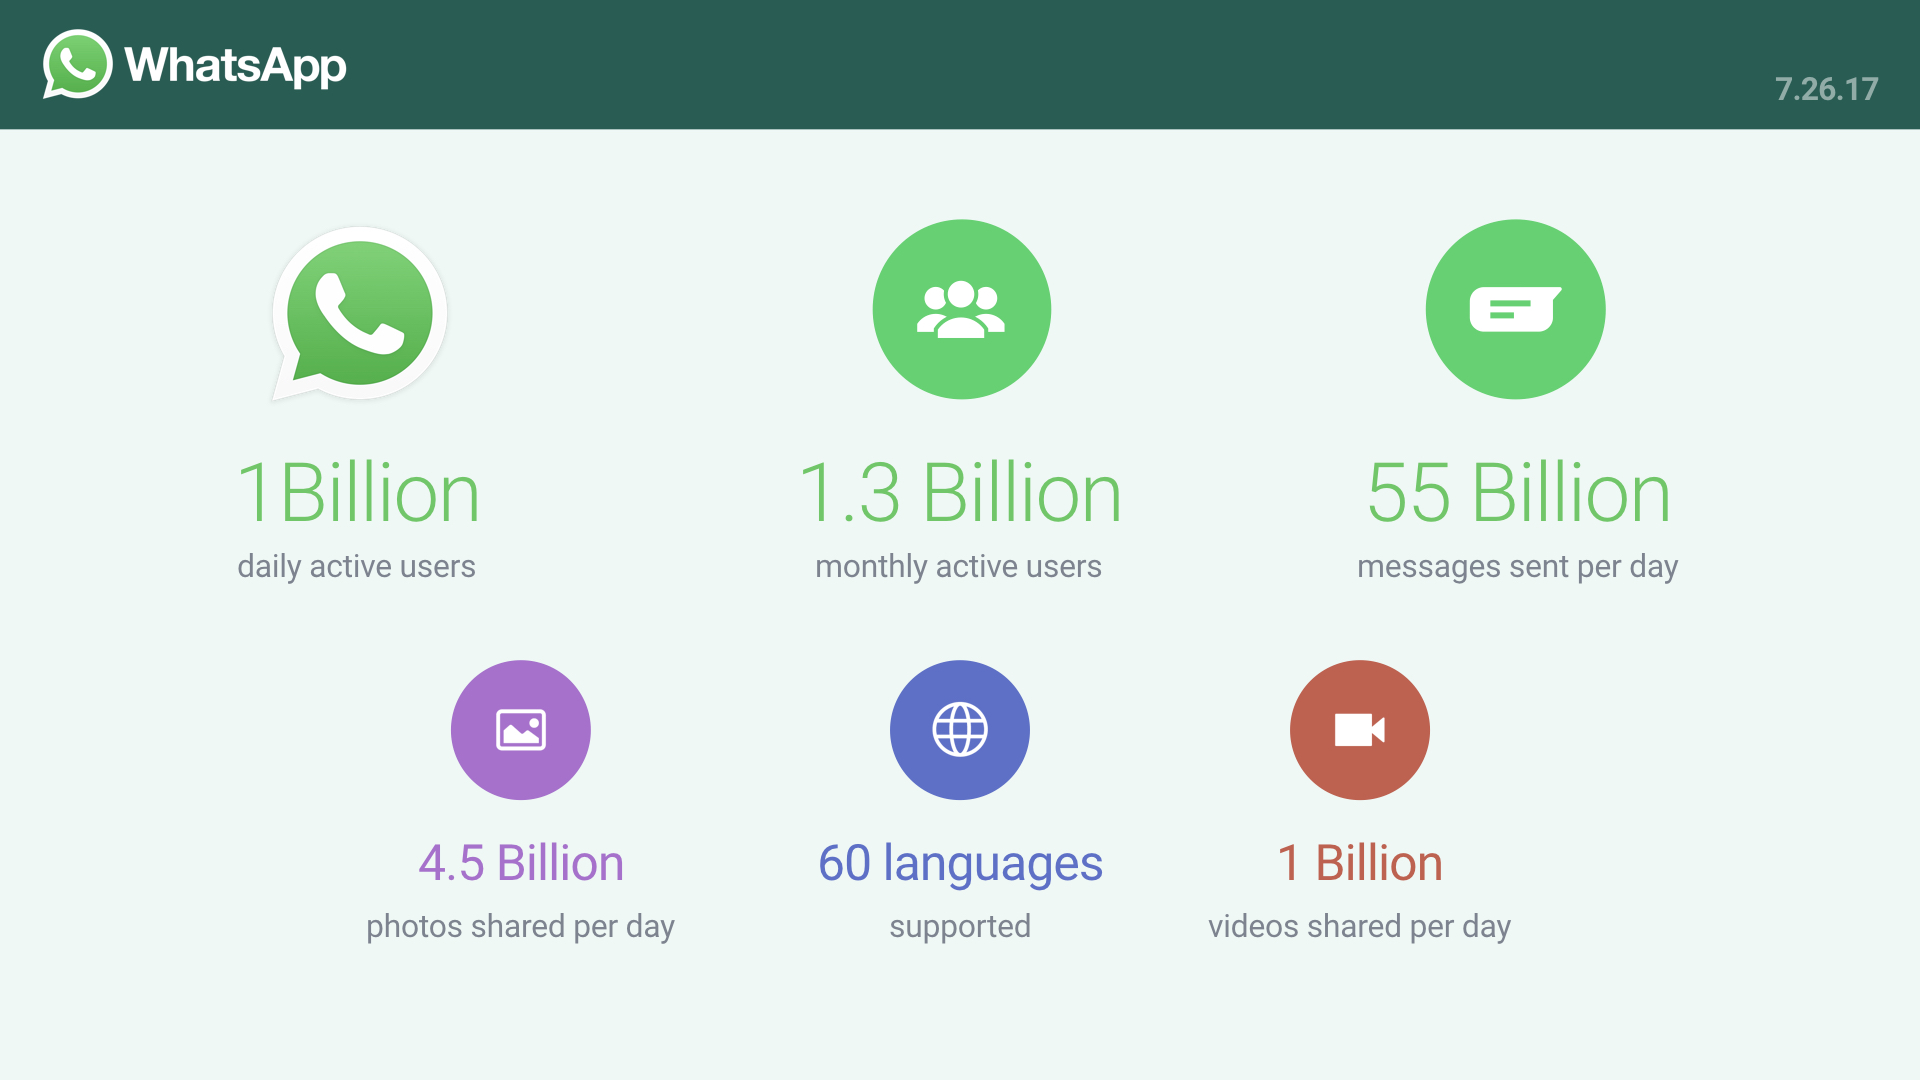 WhatsApp has 1.3 billion monthly active users worldwide and nearly 200 million users in India. 